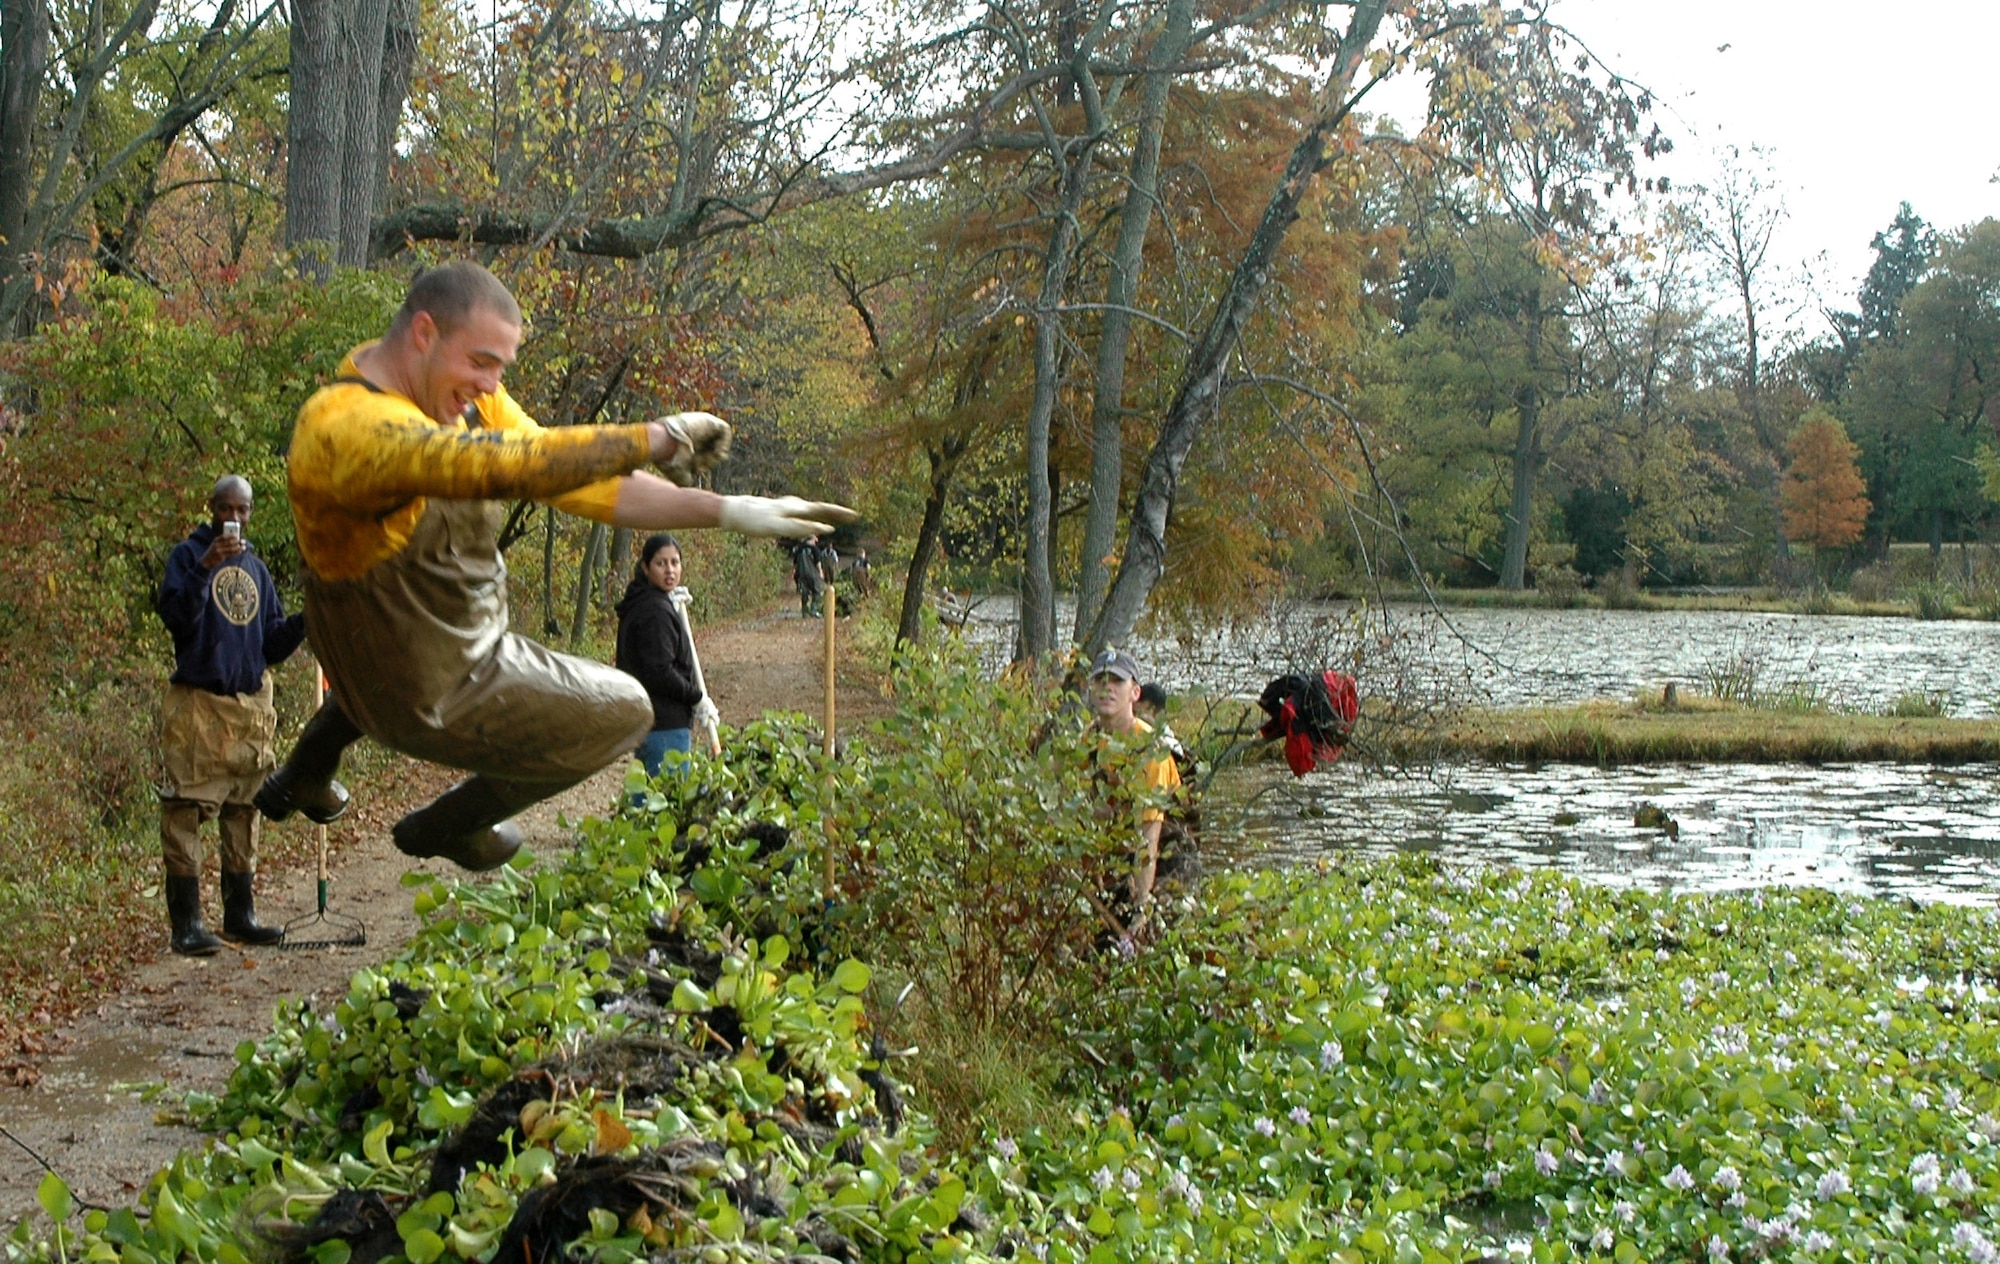 A Navy ceremonial guardsman dives into a pile of water lettuce Oct. 25 at Kenilworth Aquatic Garden in Washington, D.C. One hundred and seventy-six servicemembers from the Air Force District of Washington, Naval District of Washington and Military District of Washington spent four hours at the garden winterizing the park as part of a joint service project for national "Make a Difference Day."  (U.S. Air Force photo/R. Michael Longoria)